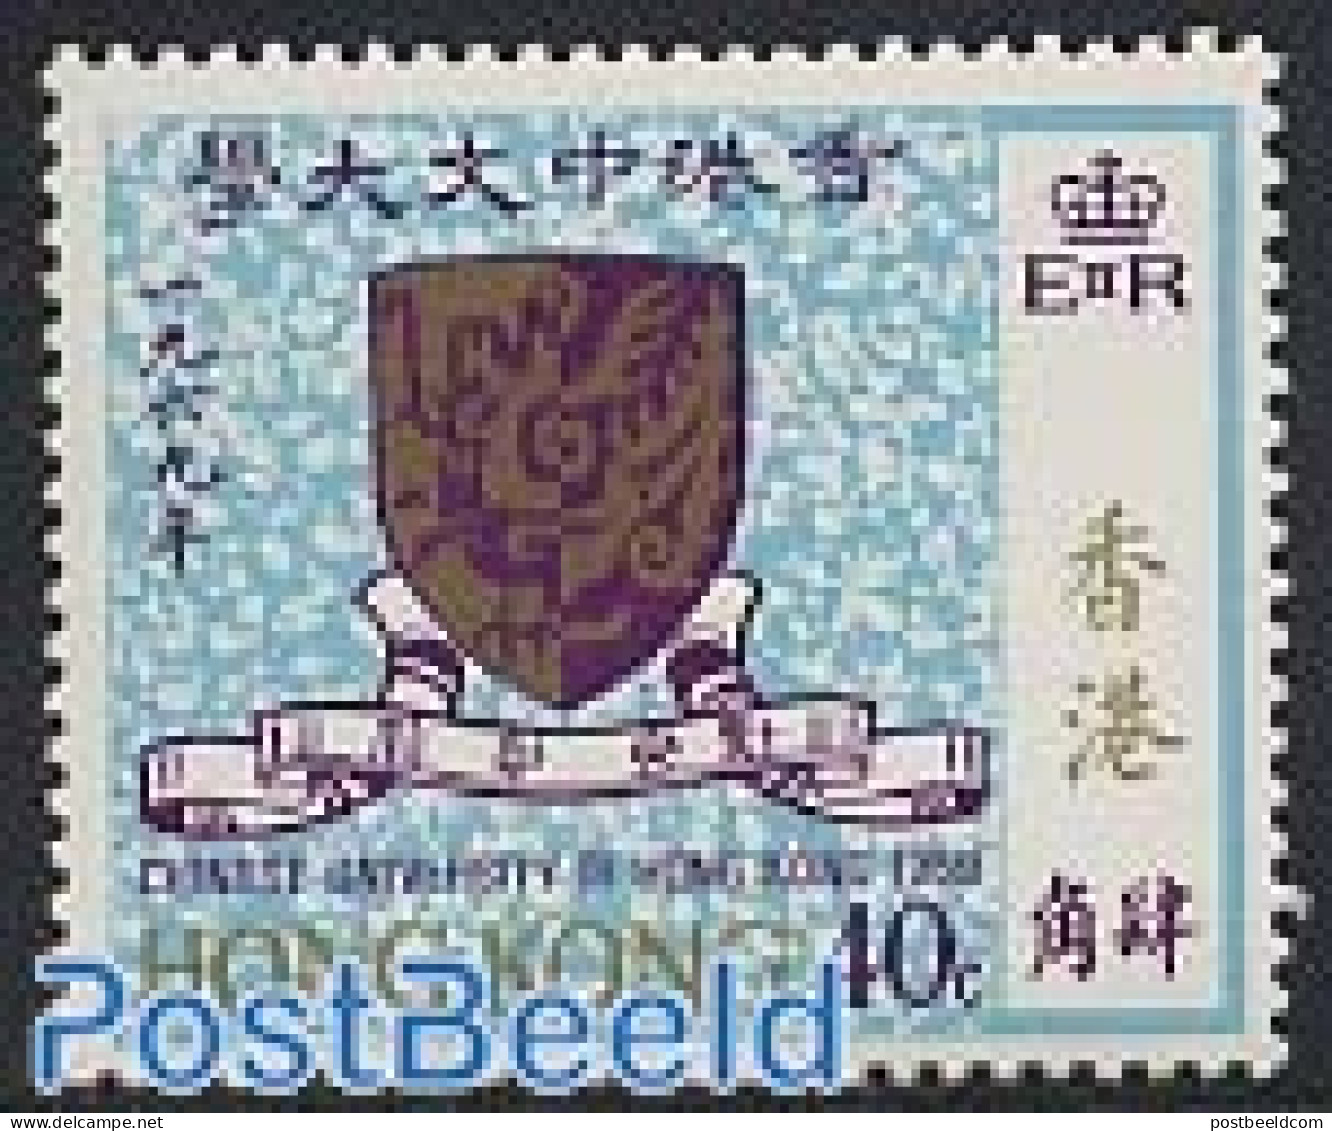 Hong Kong 1969 Chinese University 1v, Mint NH, History - Science - Coat Of Arms - Education - Unused Stamps